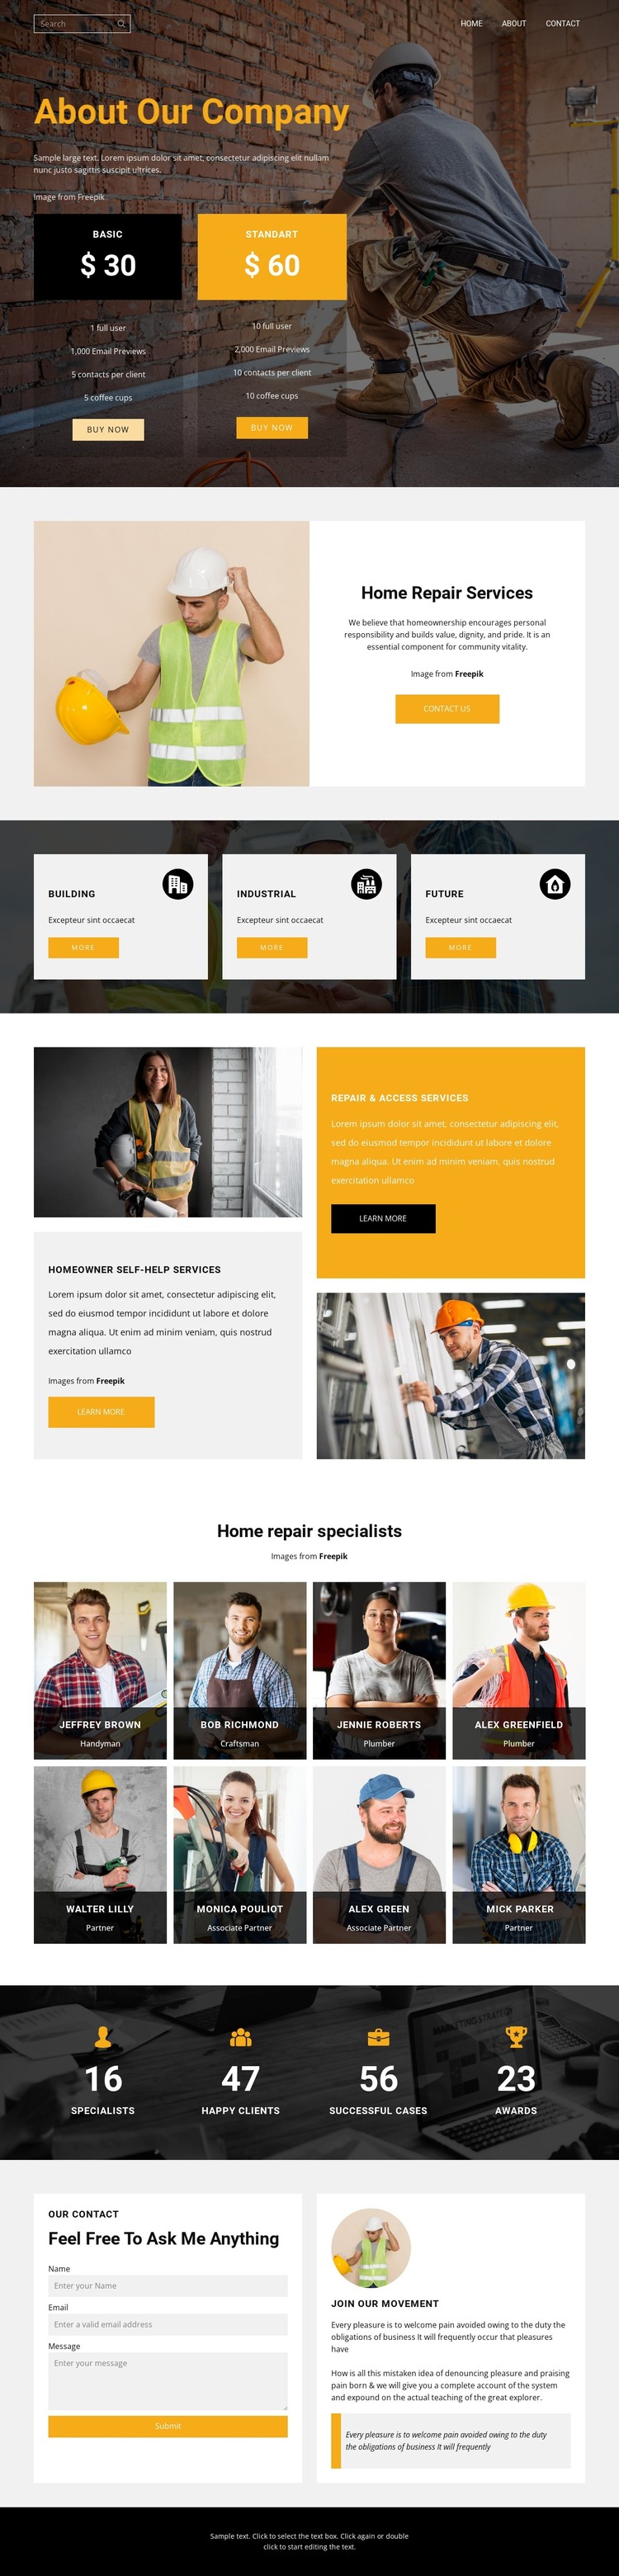 We will build a better home Web Design